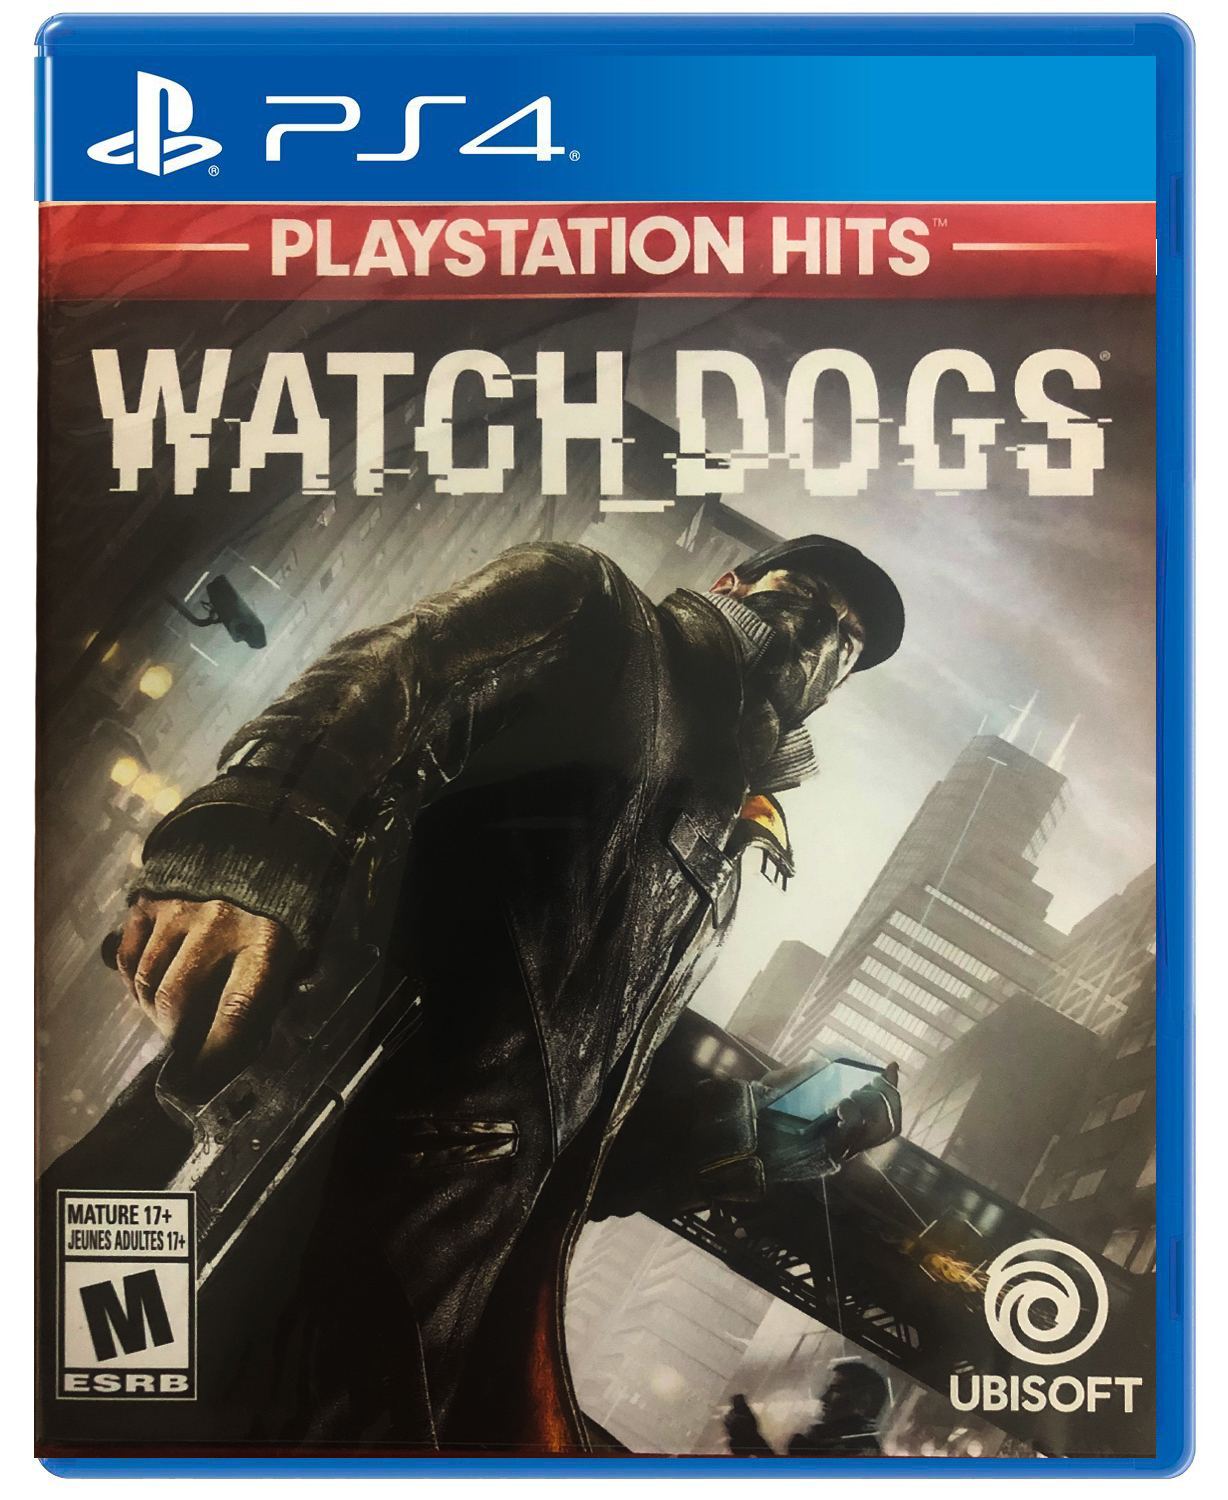 Dogs (PlayStation Hits) for PlayStation 4